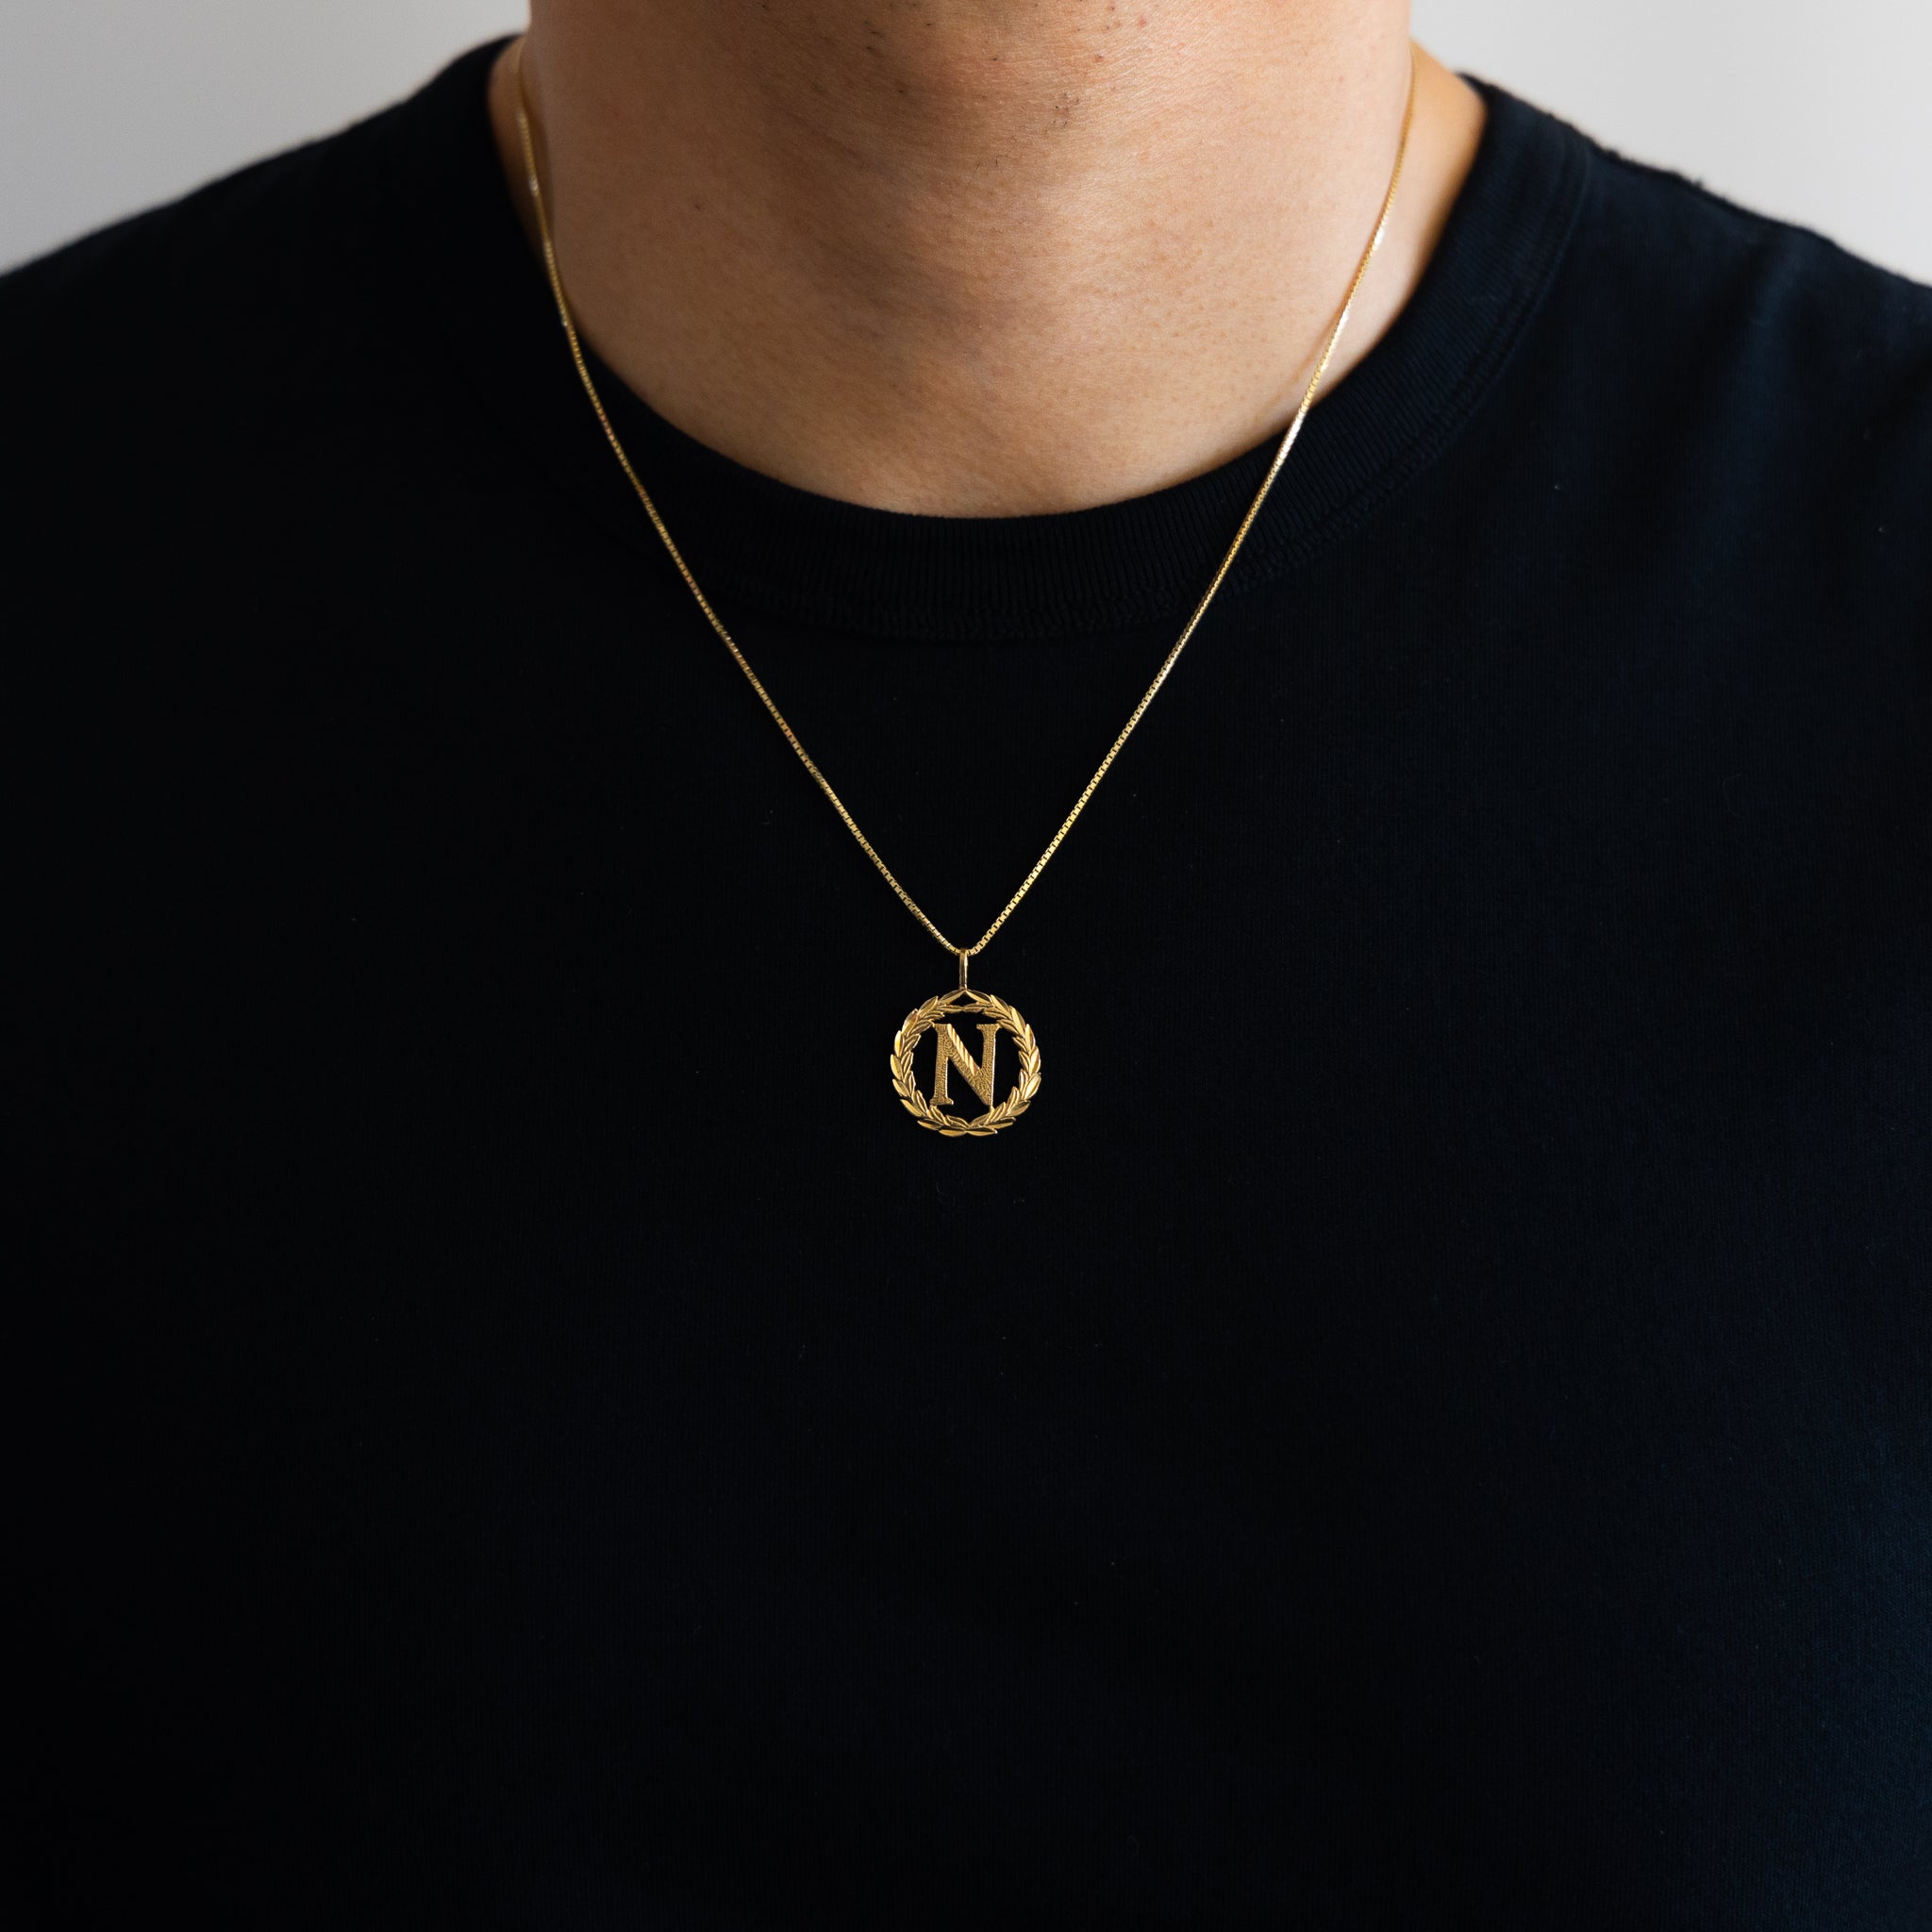 Gold Wreath N Initial Pendant | A-Z Pendants - Charlie & Co. Jewelry